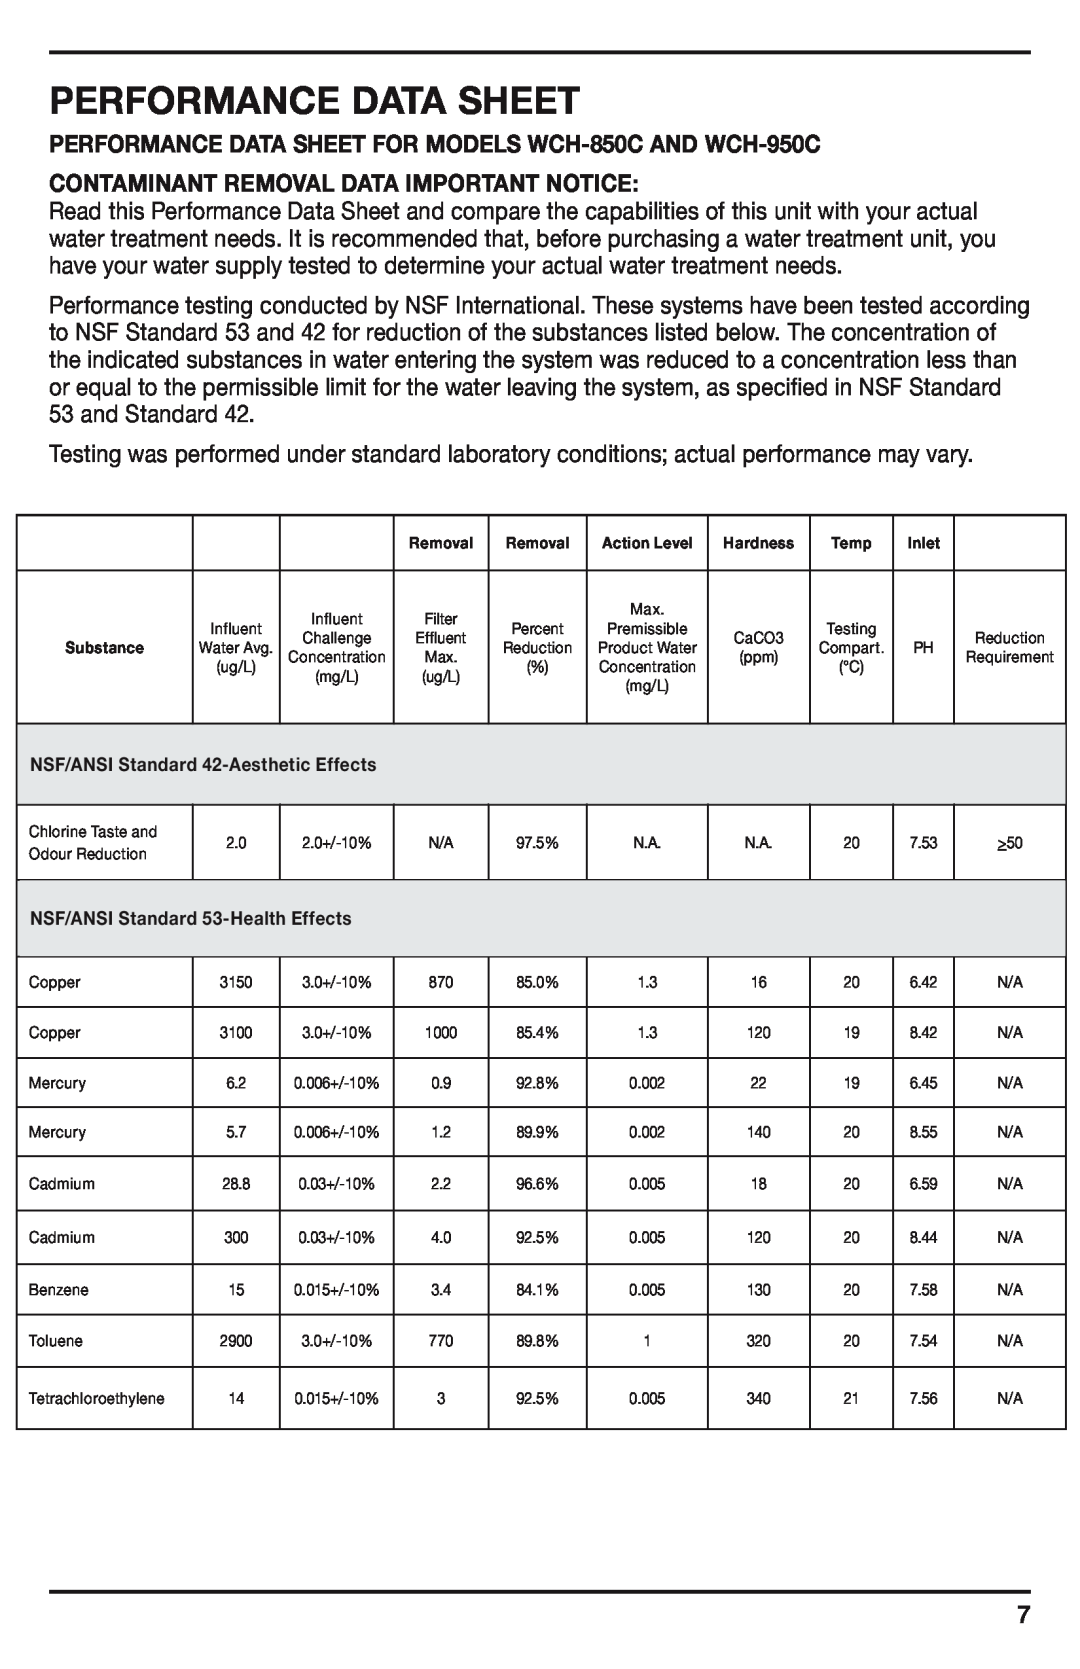 Cuisinart WCH-950C manual performance data sheet, Contaminant Removal Data Important Notice 